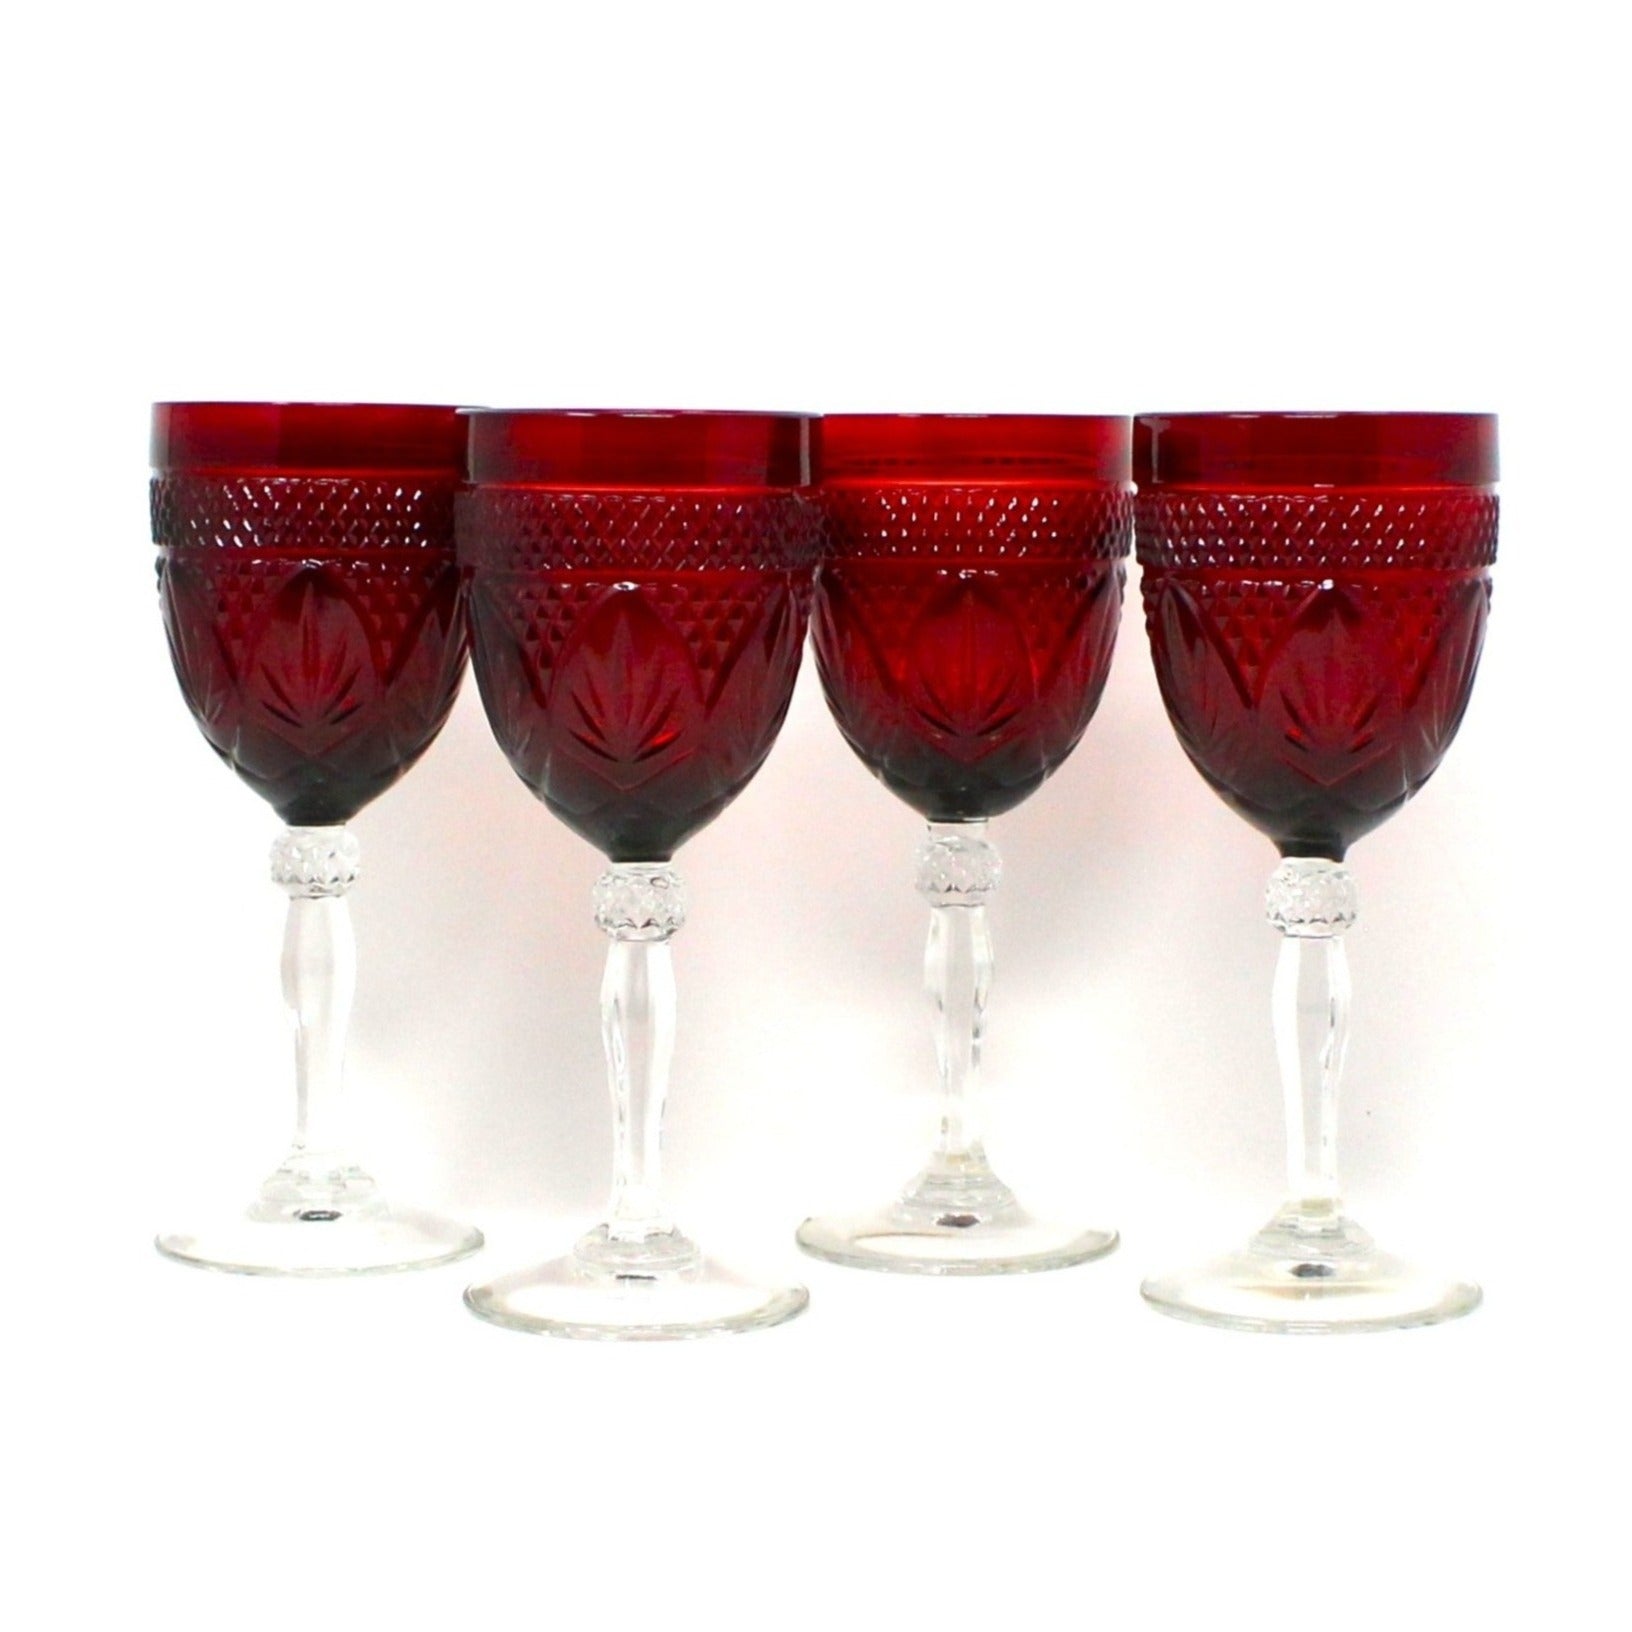 Set of 6 Libbey Glass Continental Cups in Original Box - Ruby Lane